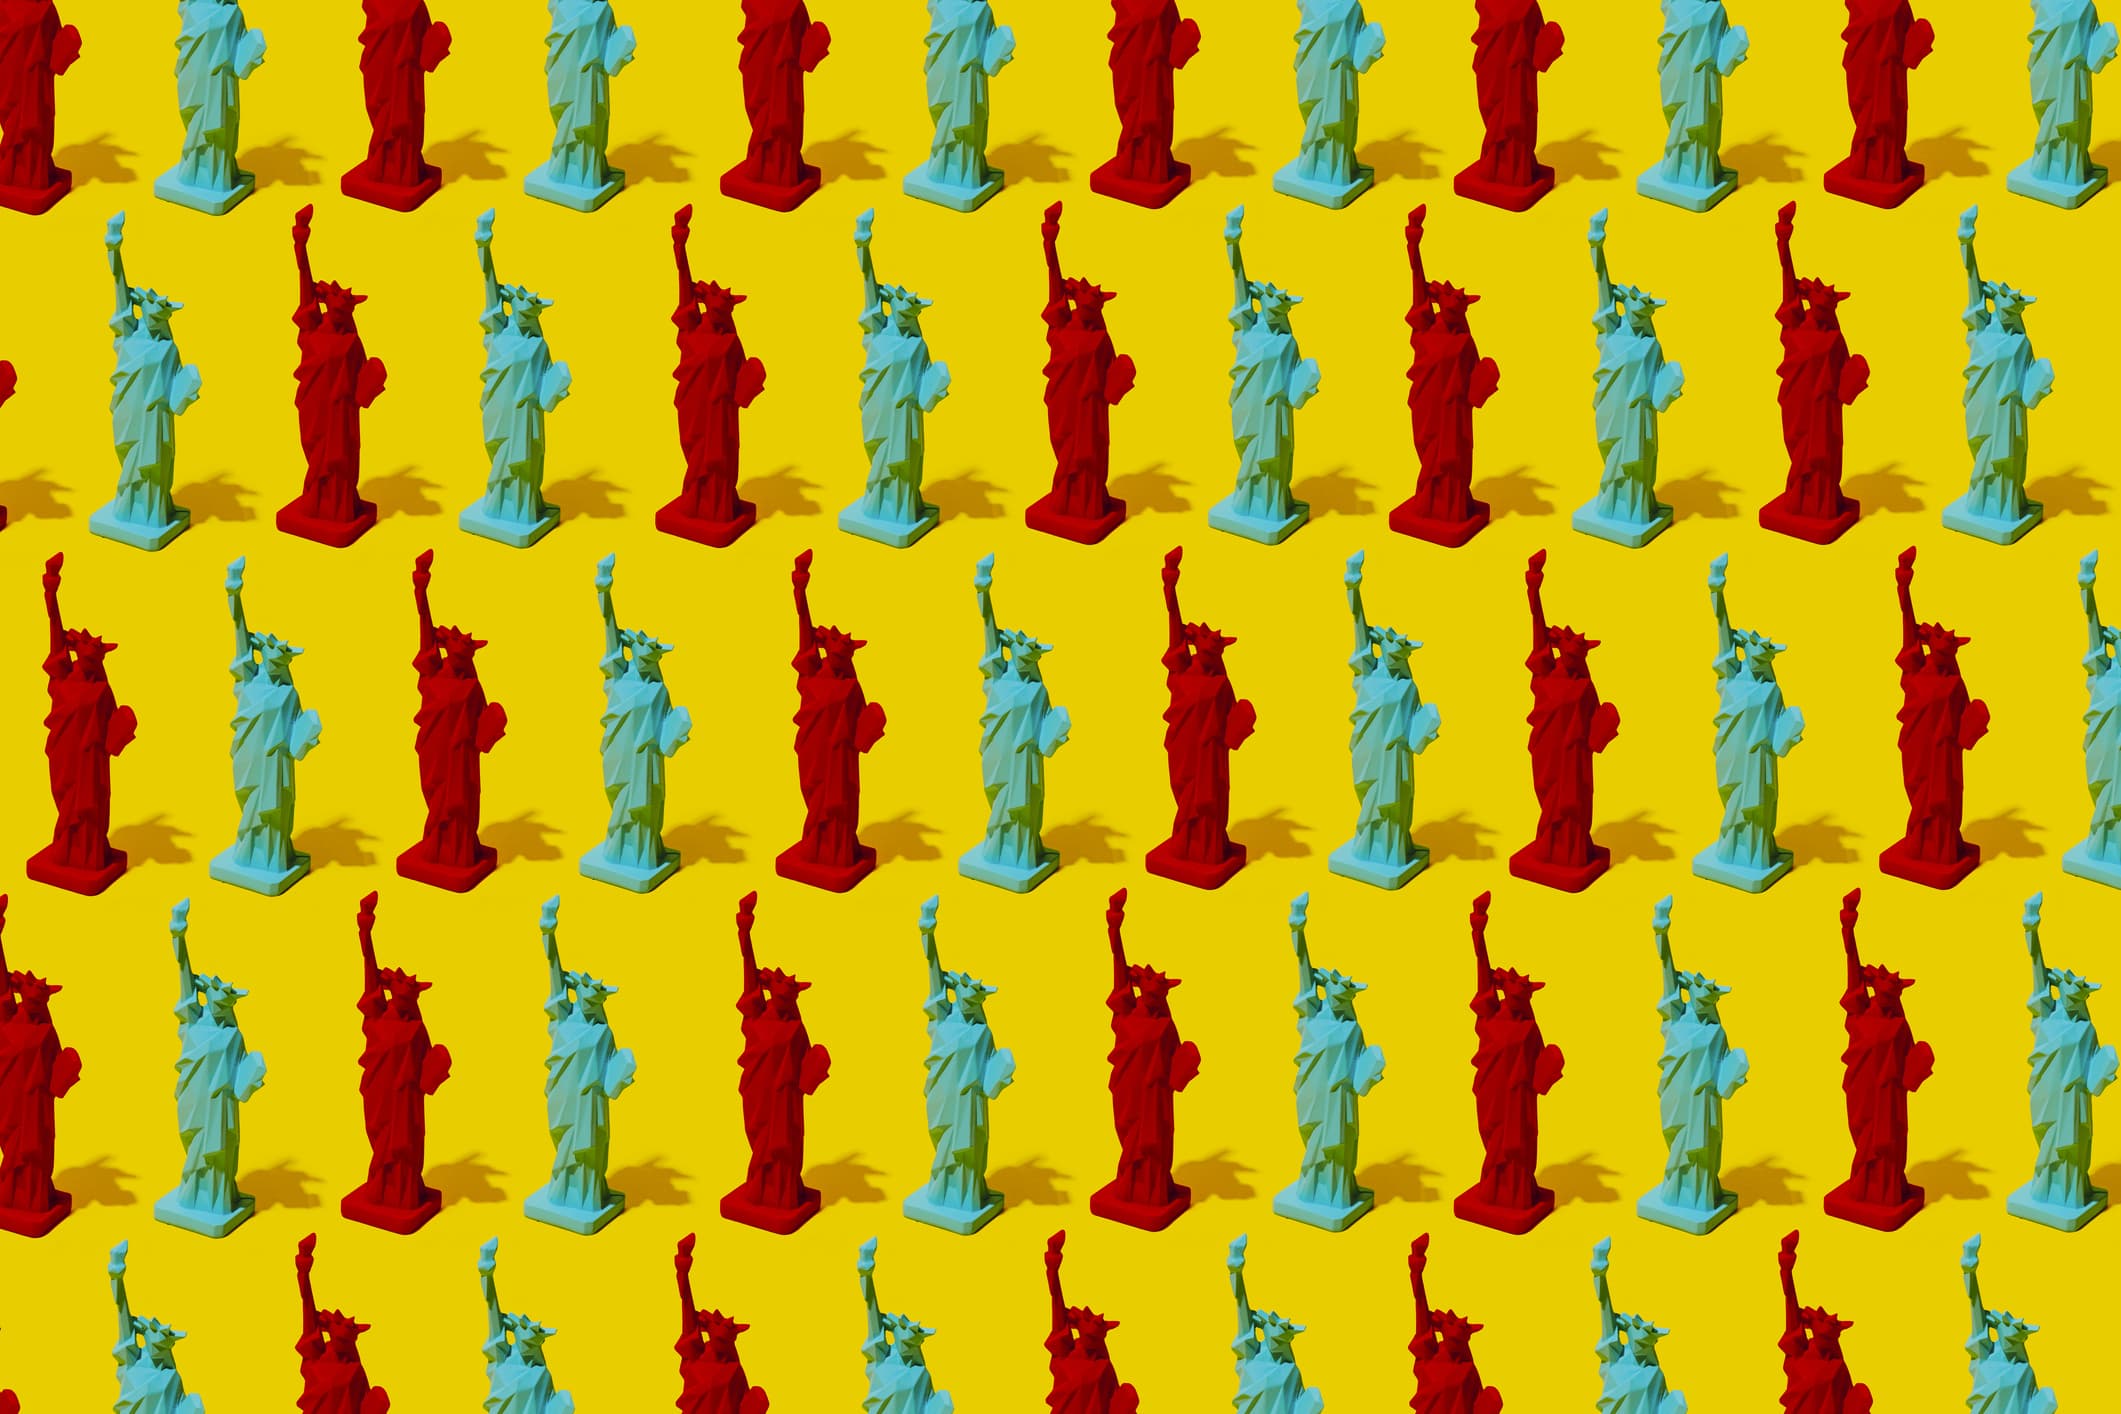 a pattern of several statues of liberty, red and blue, as the colors of the republican party and the democratic party, on a yellow background